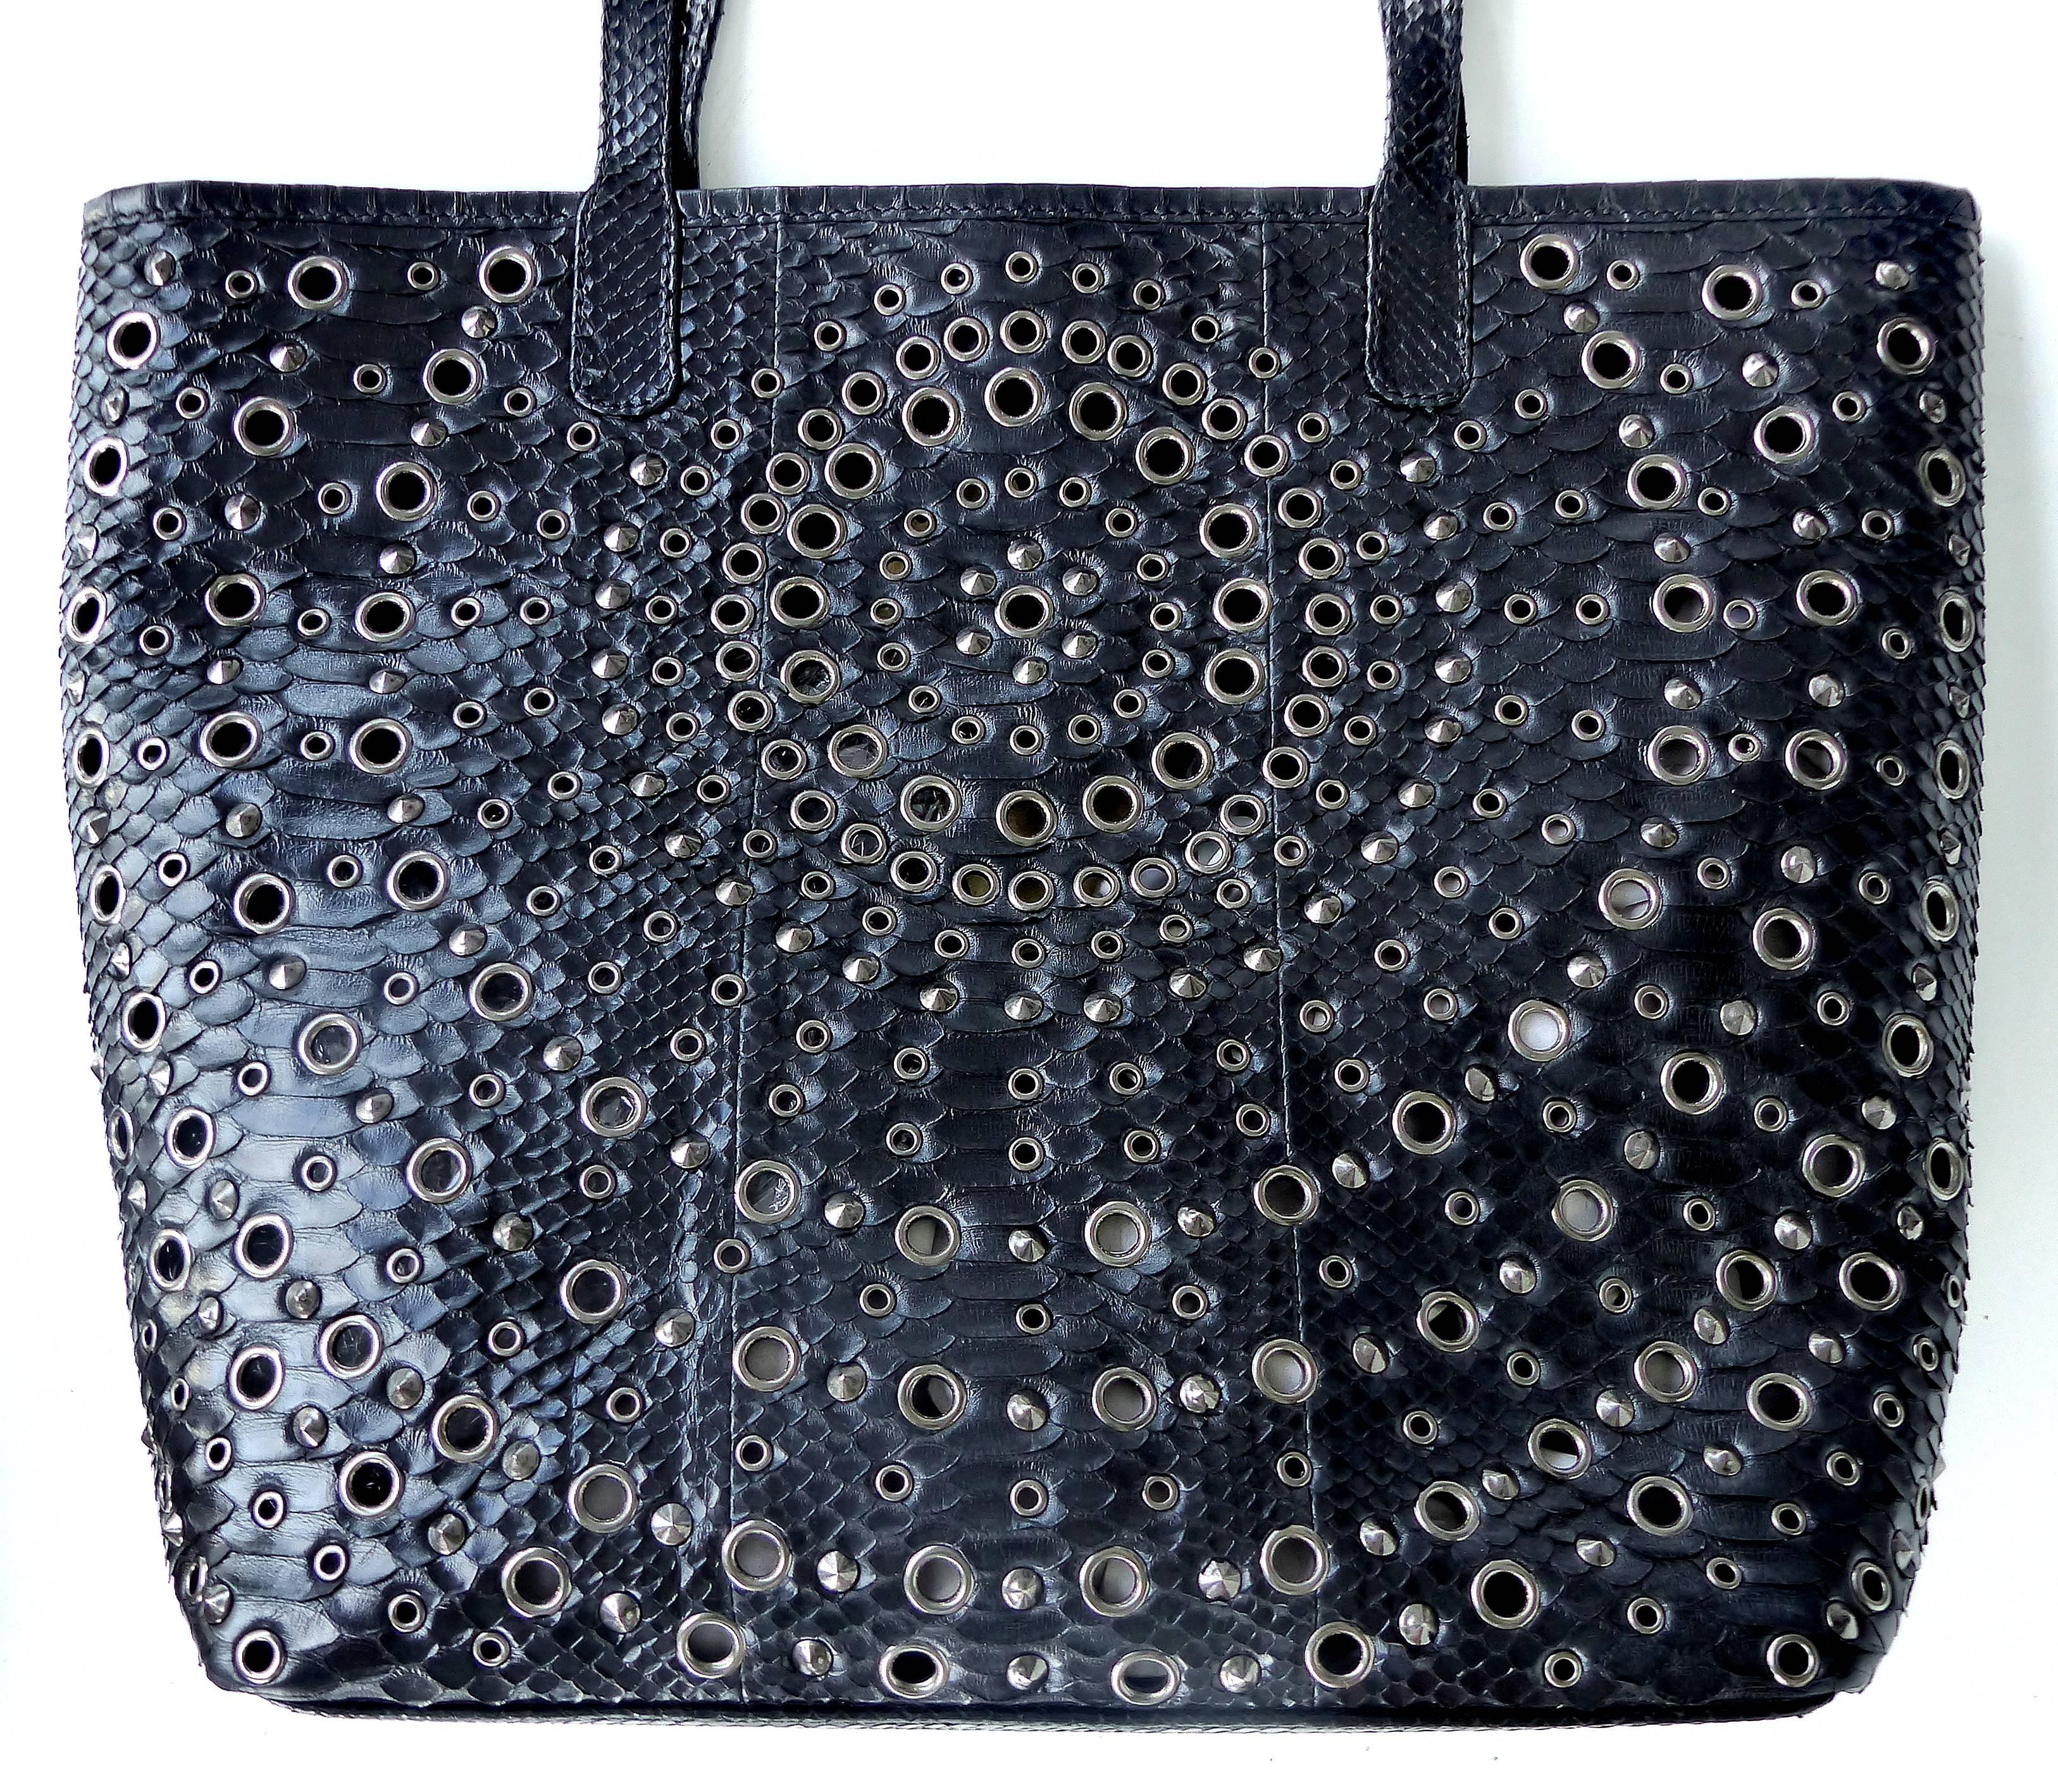 
Offered for sale is a large perforated and studded rock python tote bag by Glen Arthur Designs for GaBag Co. This open tote has one zippered exterior pocket and magnetic tab closures. The perforated studs are stainless steel. The interior is lined